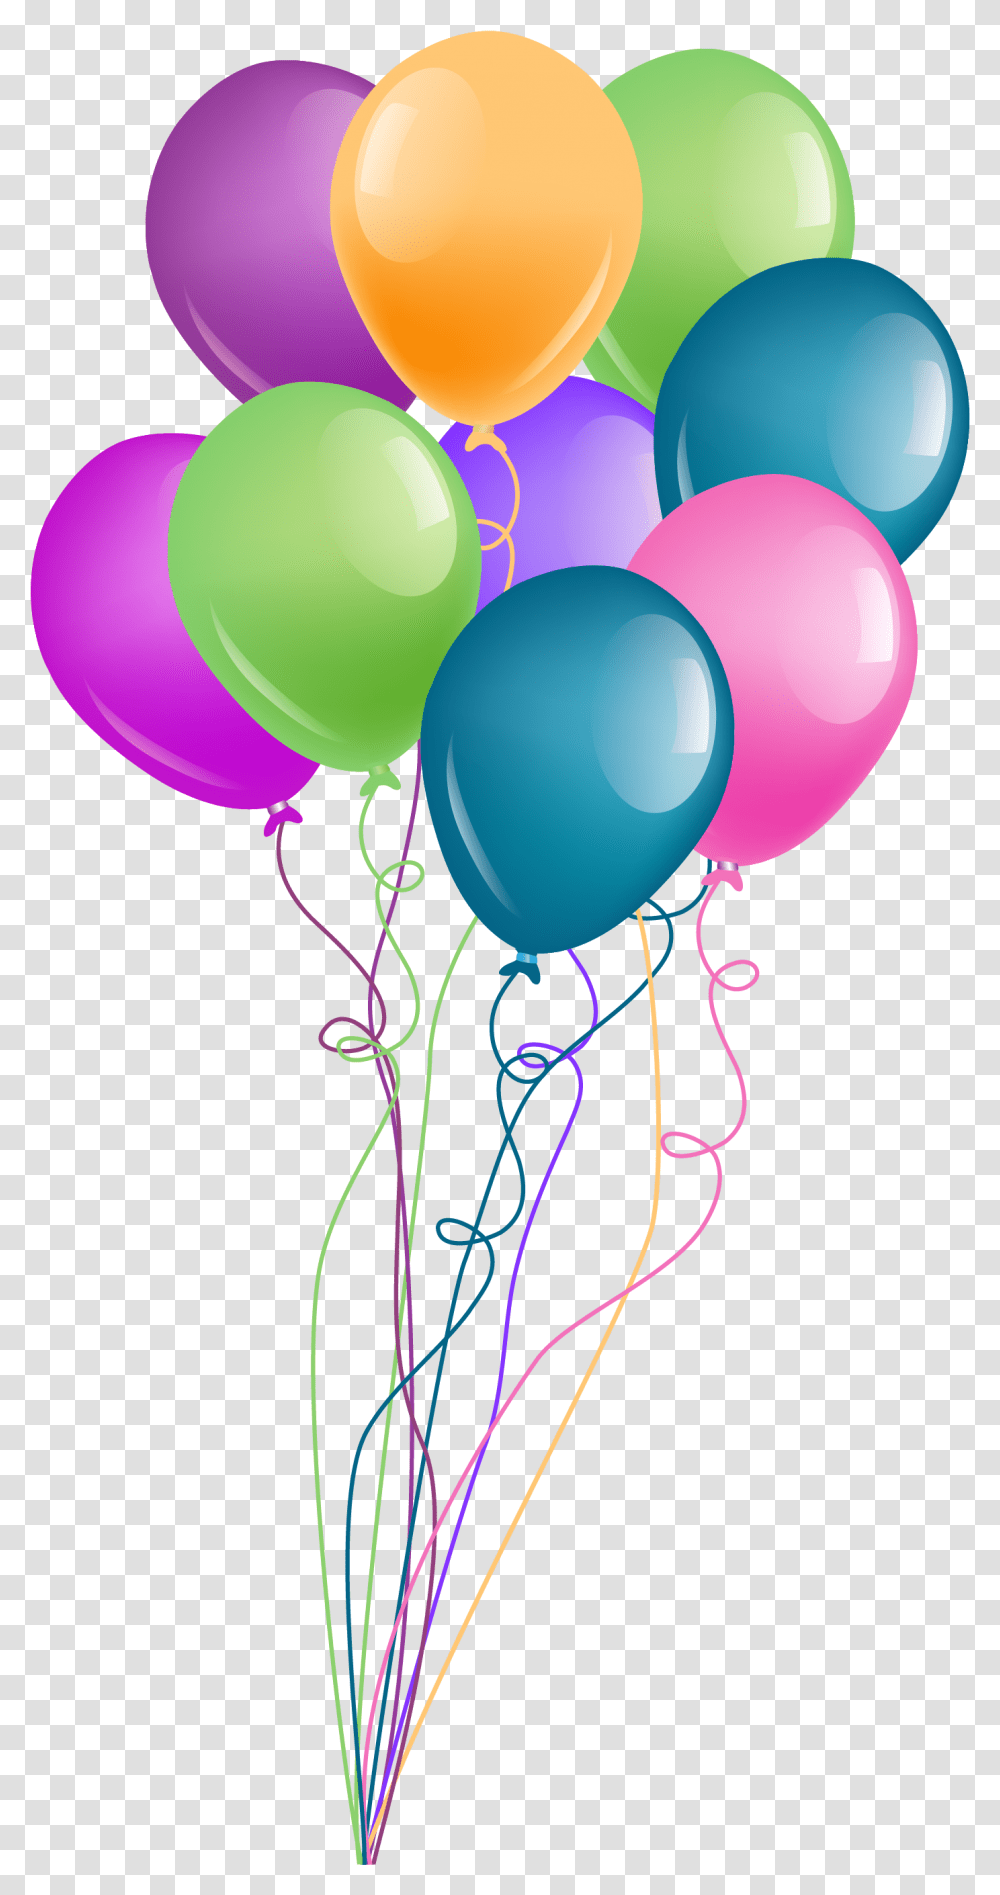 Library Of Balloon Dog Black And White Files Happy Birthday Hd Transparent Png